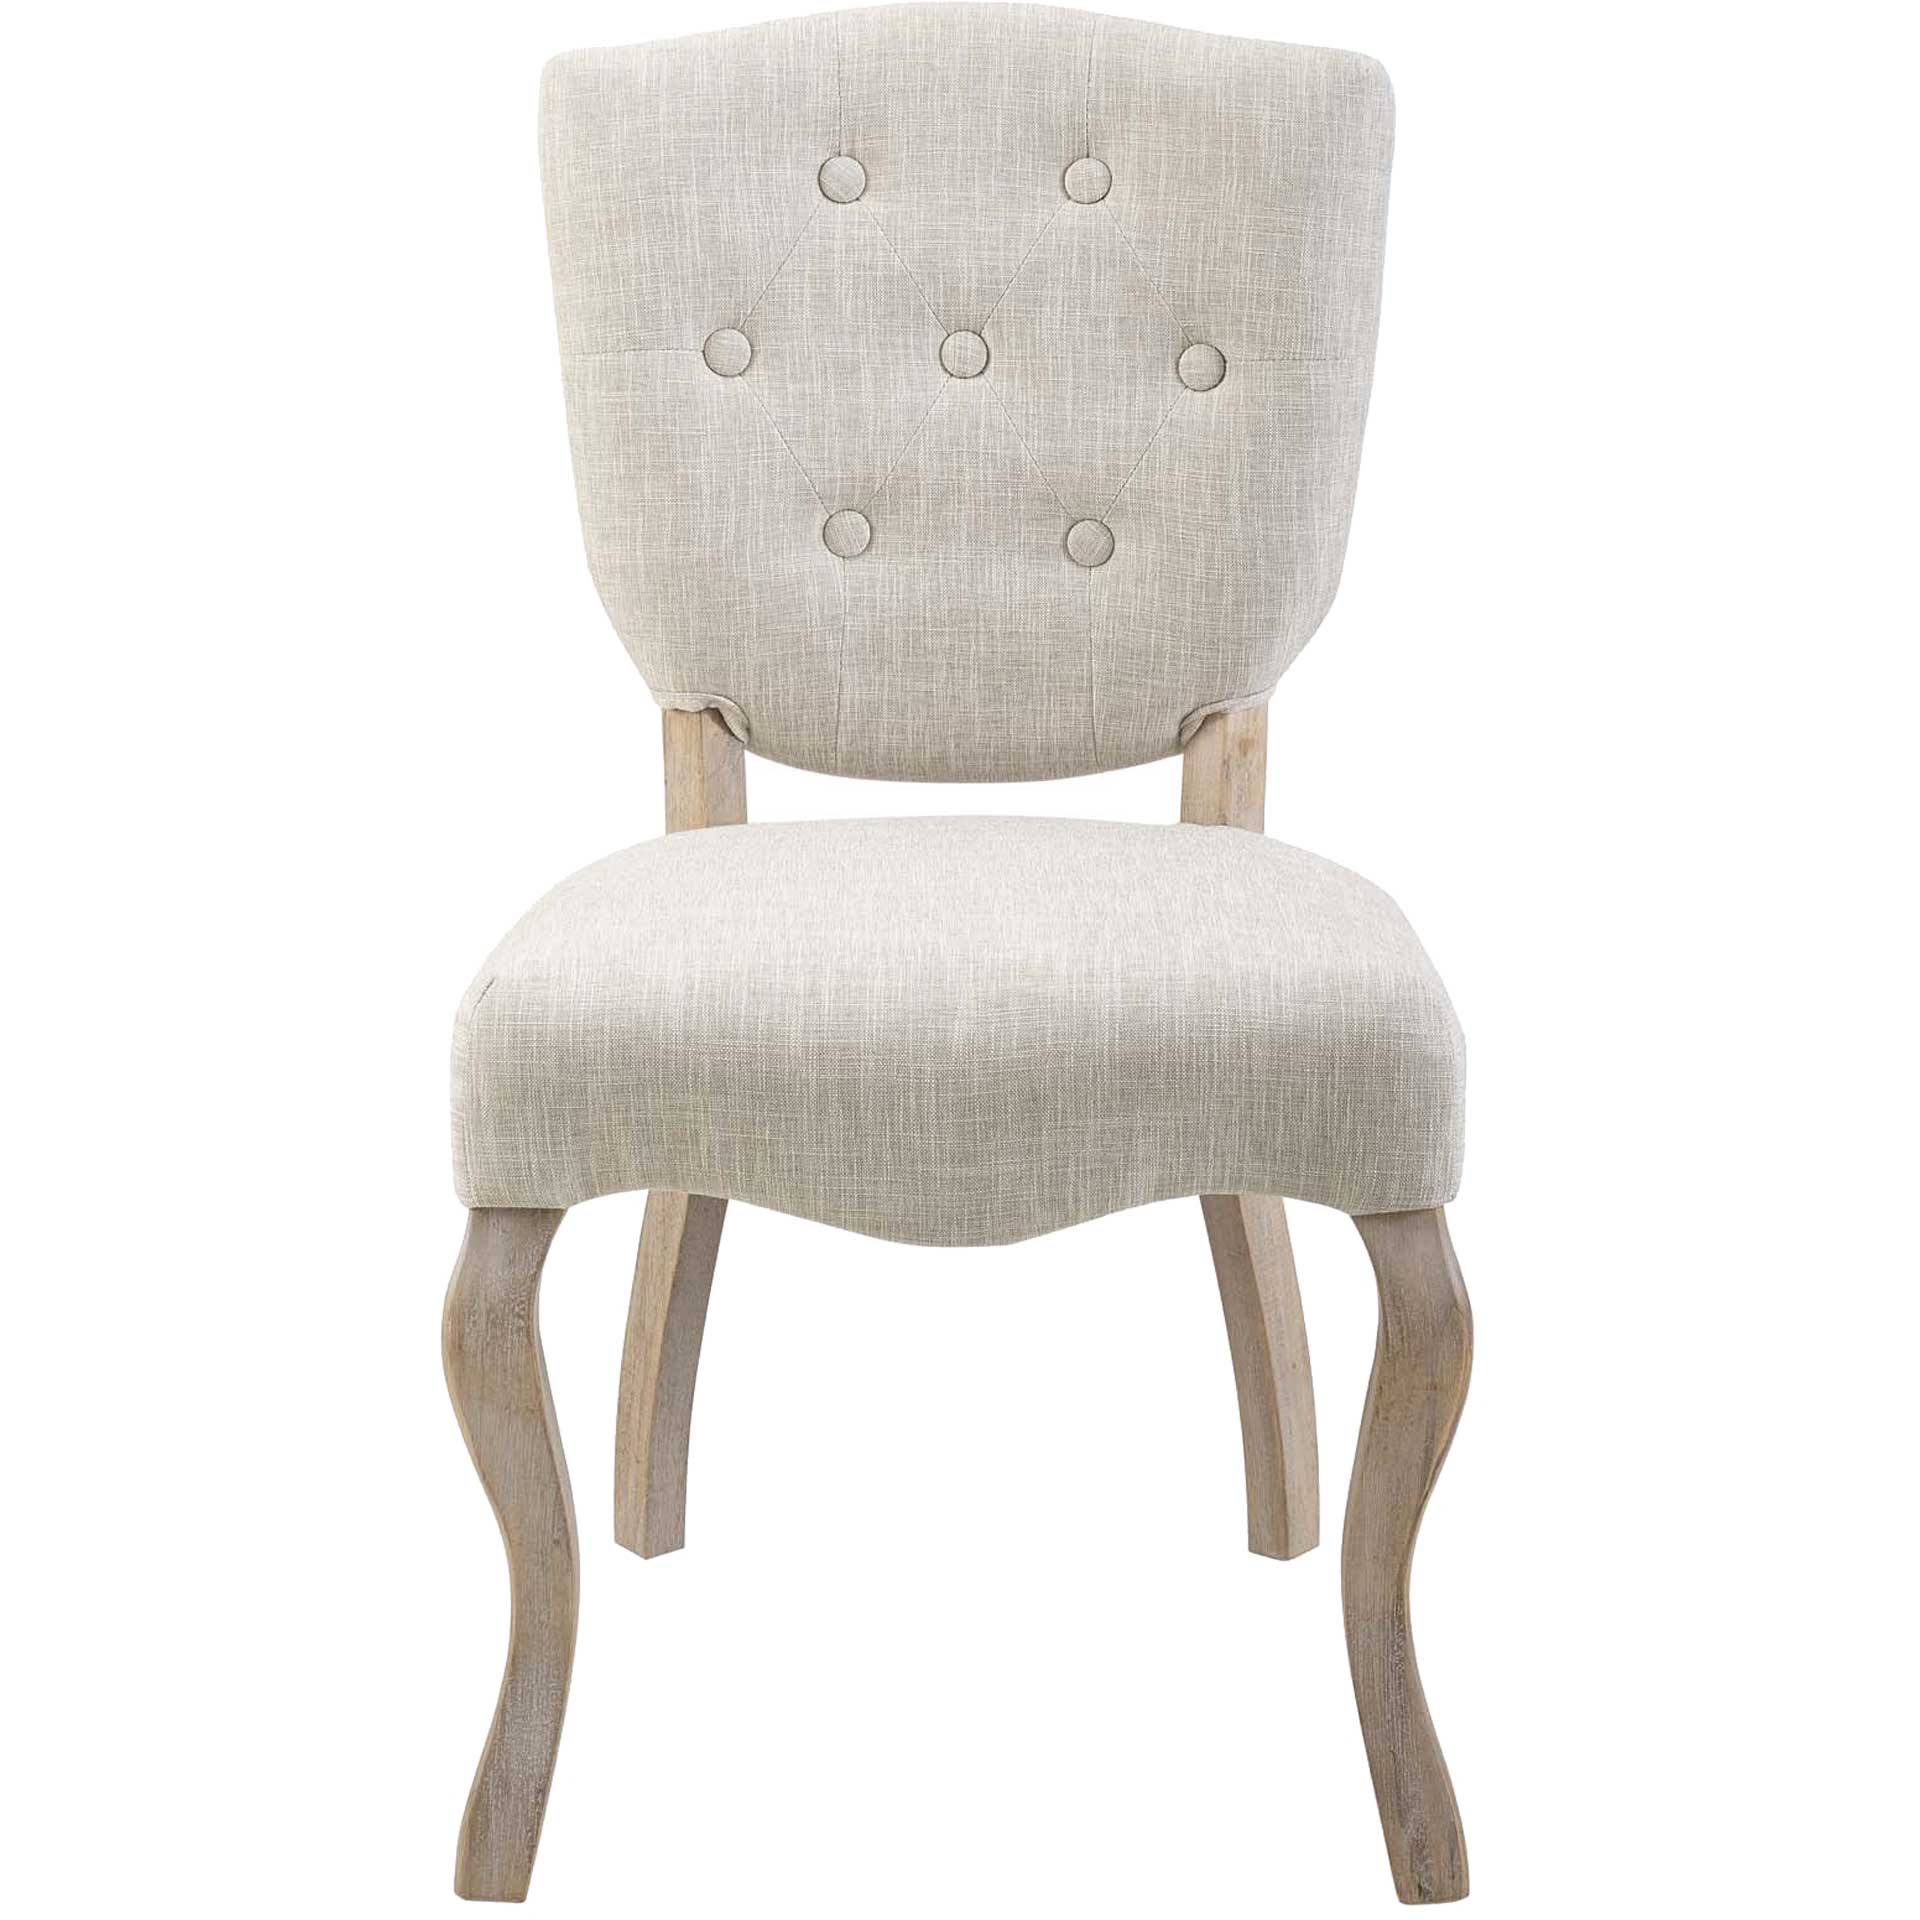 Angie Upholstered Dining Side Chair Beige